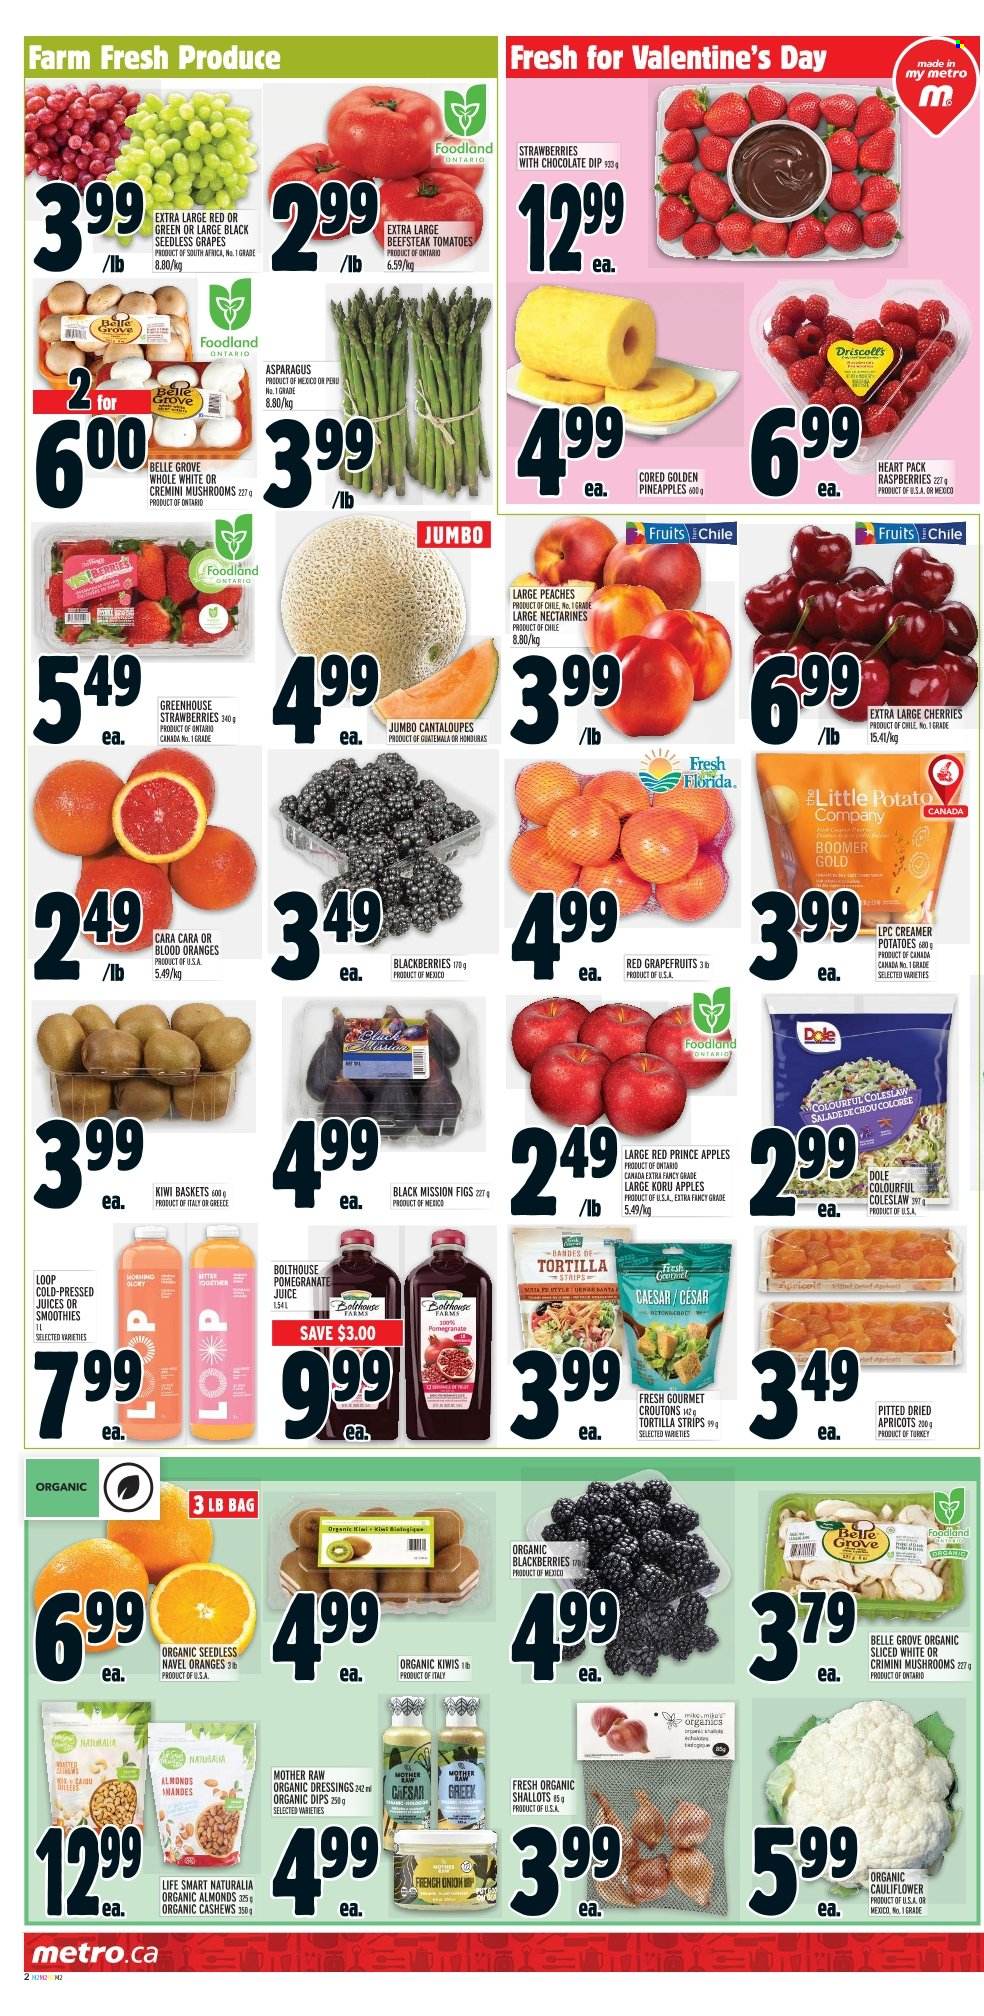 thumbnail - Metro Flyer - February 09, 2023 - February 15, 2023 - Sales products - mushrooms, tortillas, asparagus, cantaloupe, shallots, tomatoes, potatoes, Dole, apples, blackberries, figs, grapefruits, grapes, nectarines, seedless grapes, strawberries, pineapple, cherries, oranges, apricots, pomegranate, peaches, navel oranges, coleslaw, dip, croutons, almonds, dried fruit, dried figs, juice, basket, kiwi. Page 3.